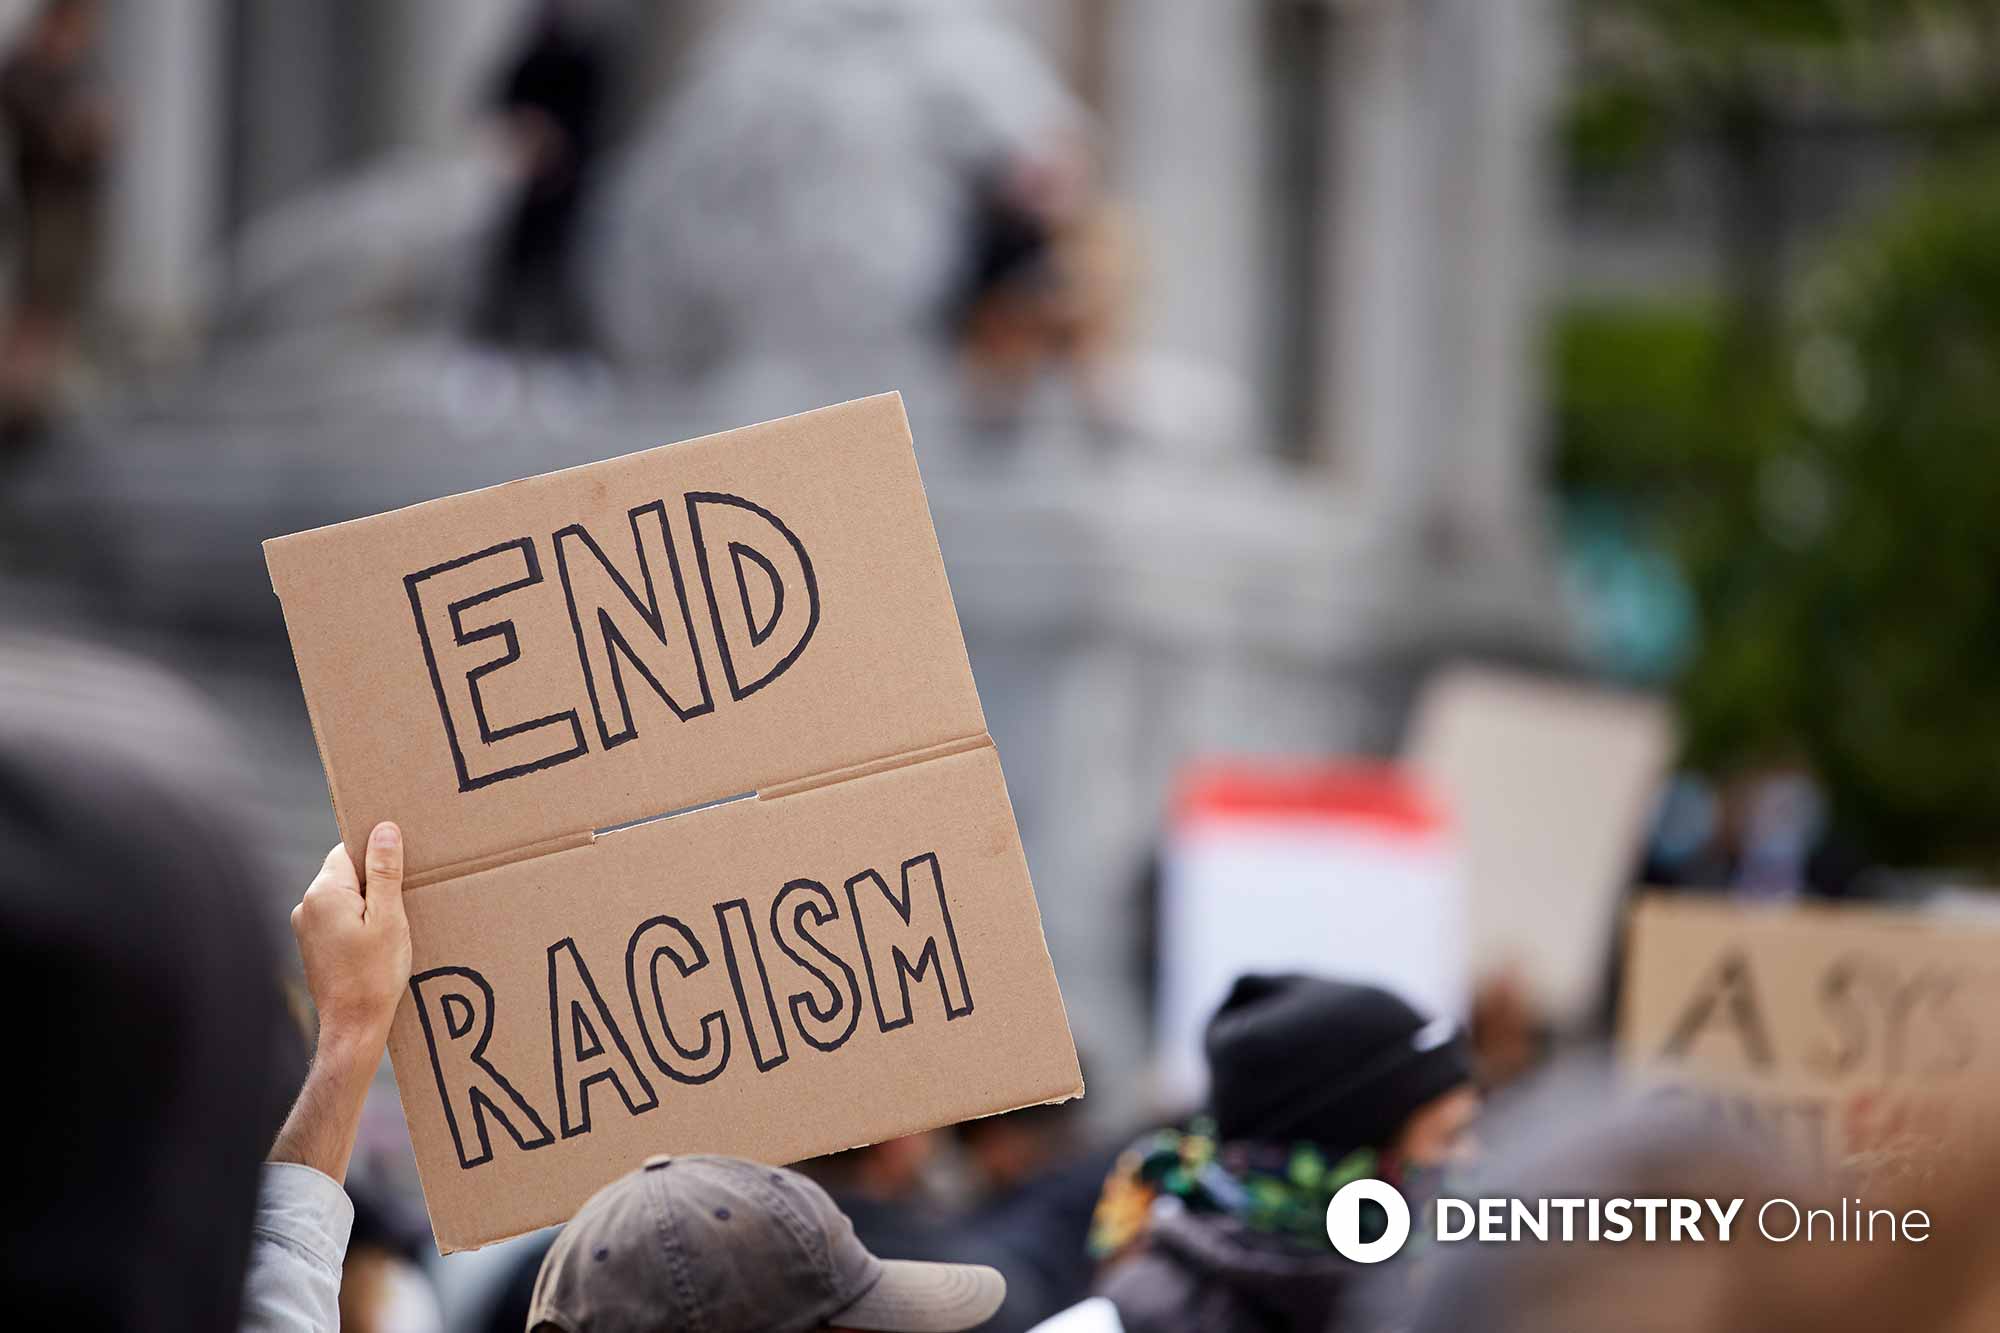 Dental experts are calling for urgent moves towards improving equality and diversity in dentistry